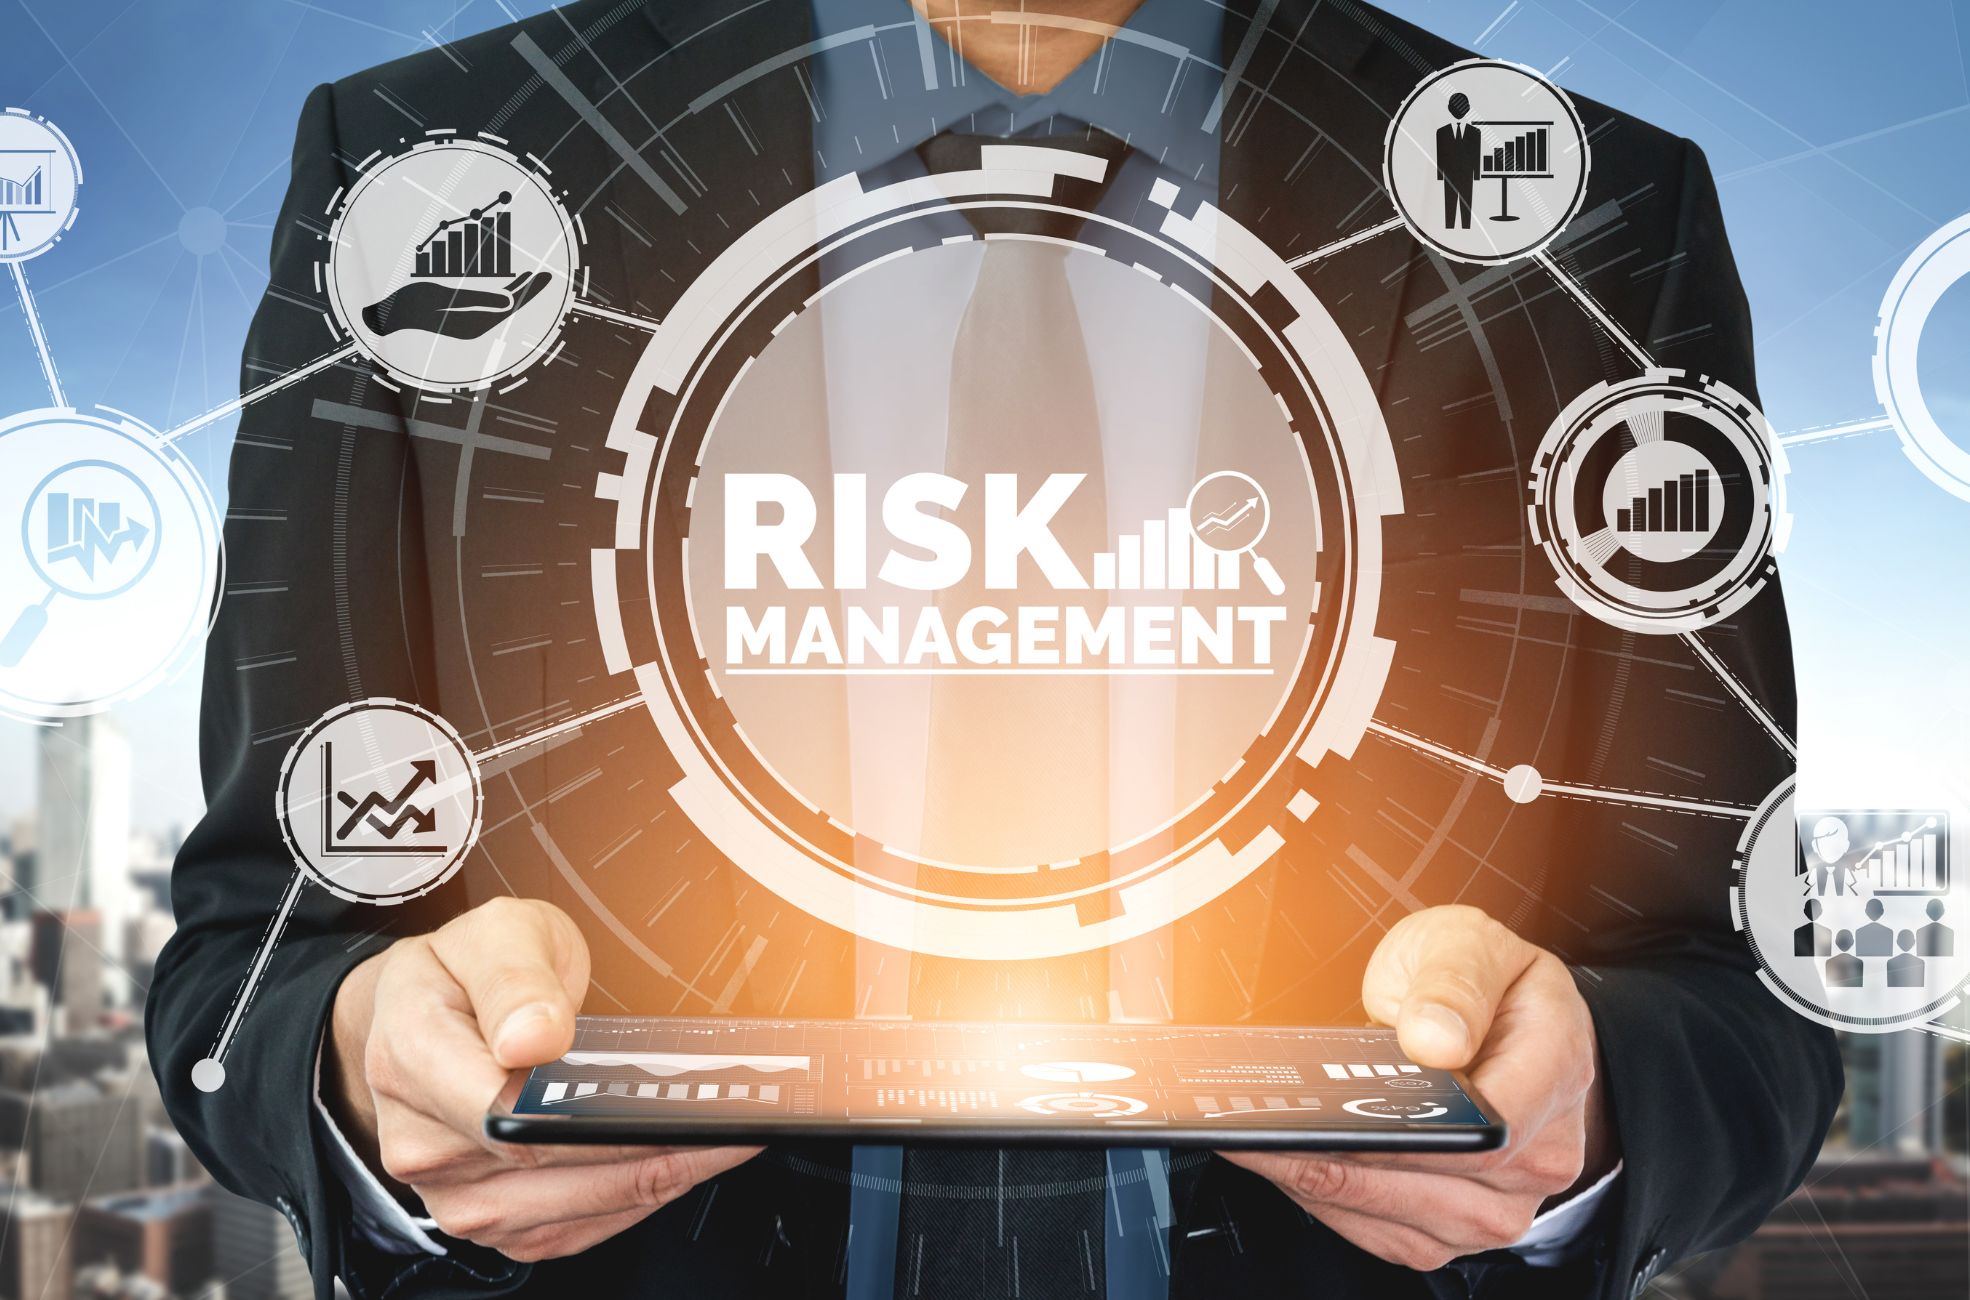 Risk Management Being Held By Man's Hand